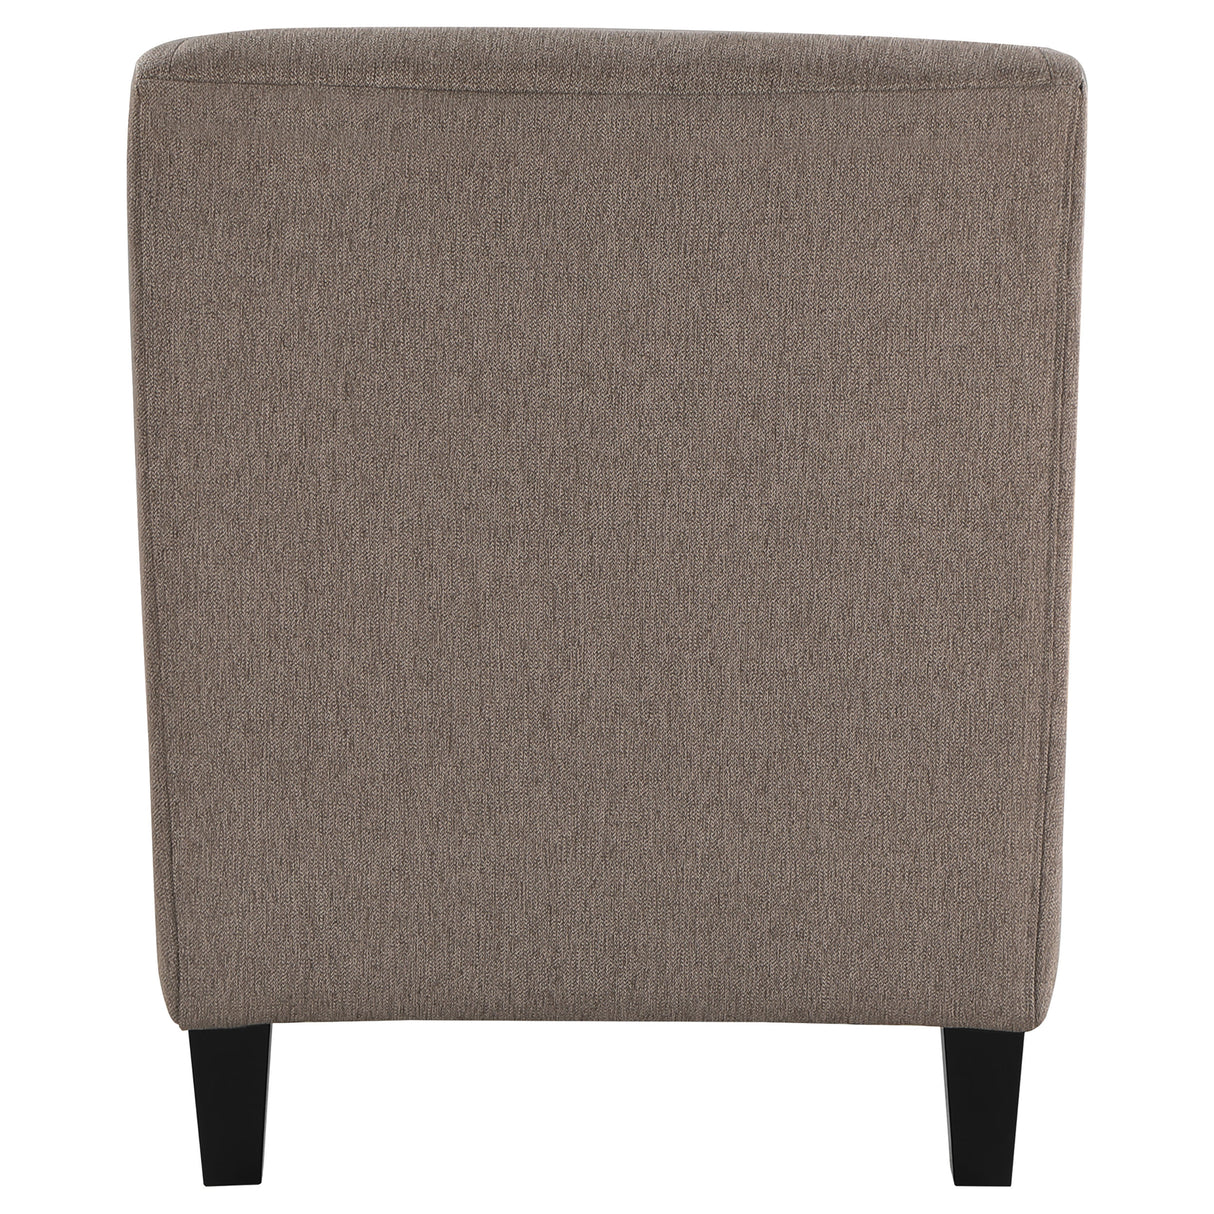 Chair - Liam Upholstered Sloped Arm Accent Club Chair Camel